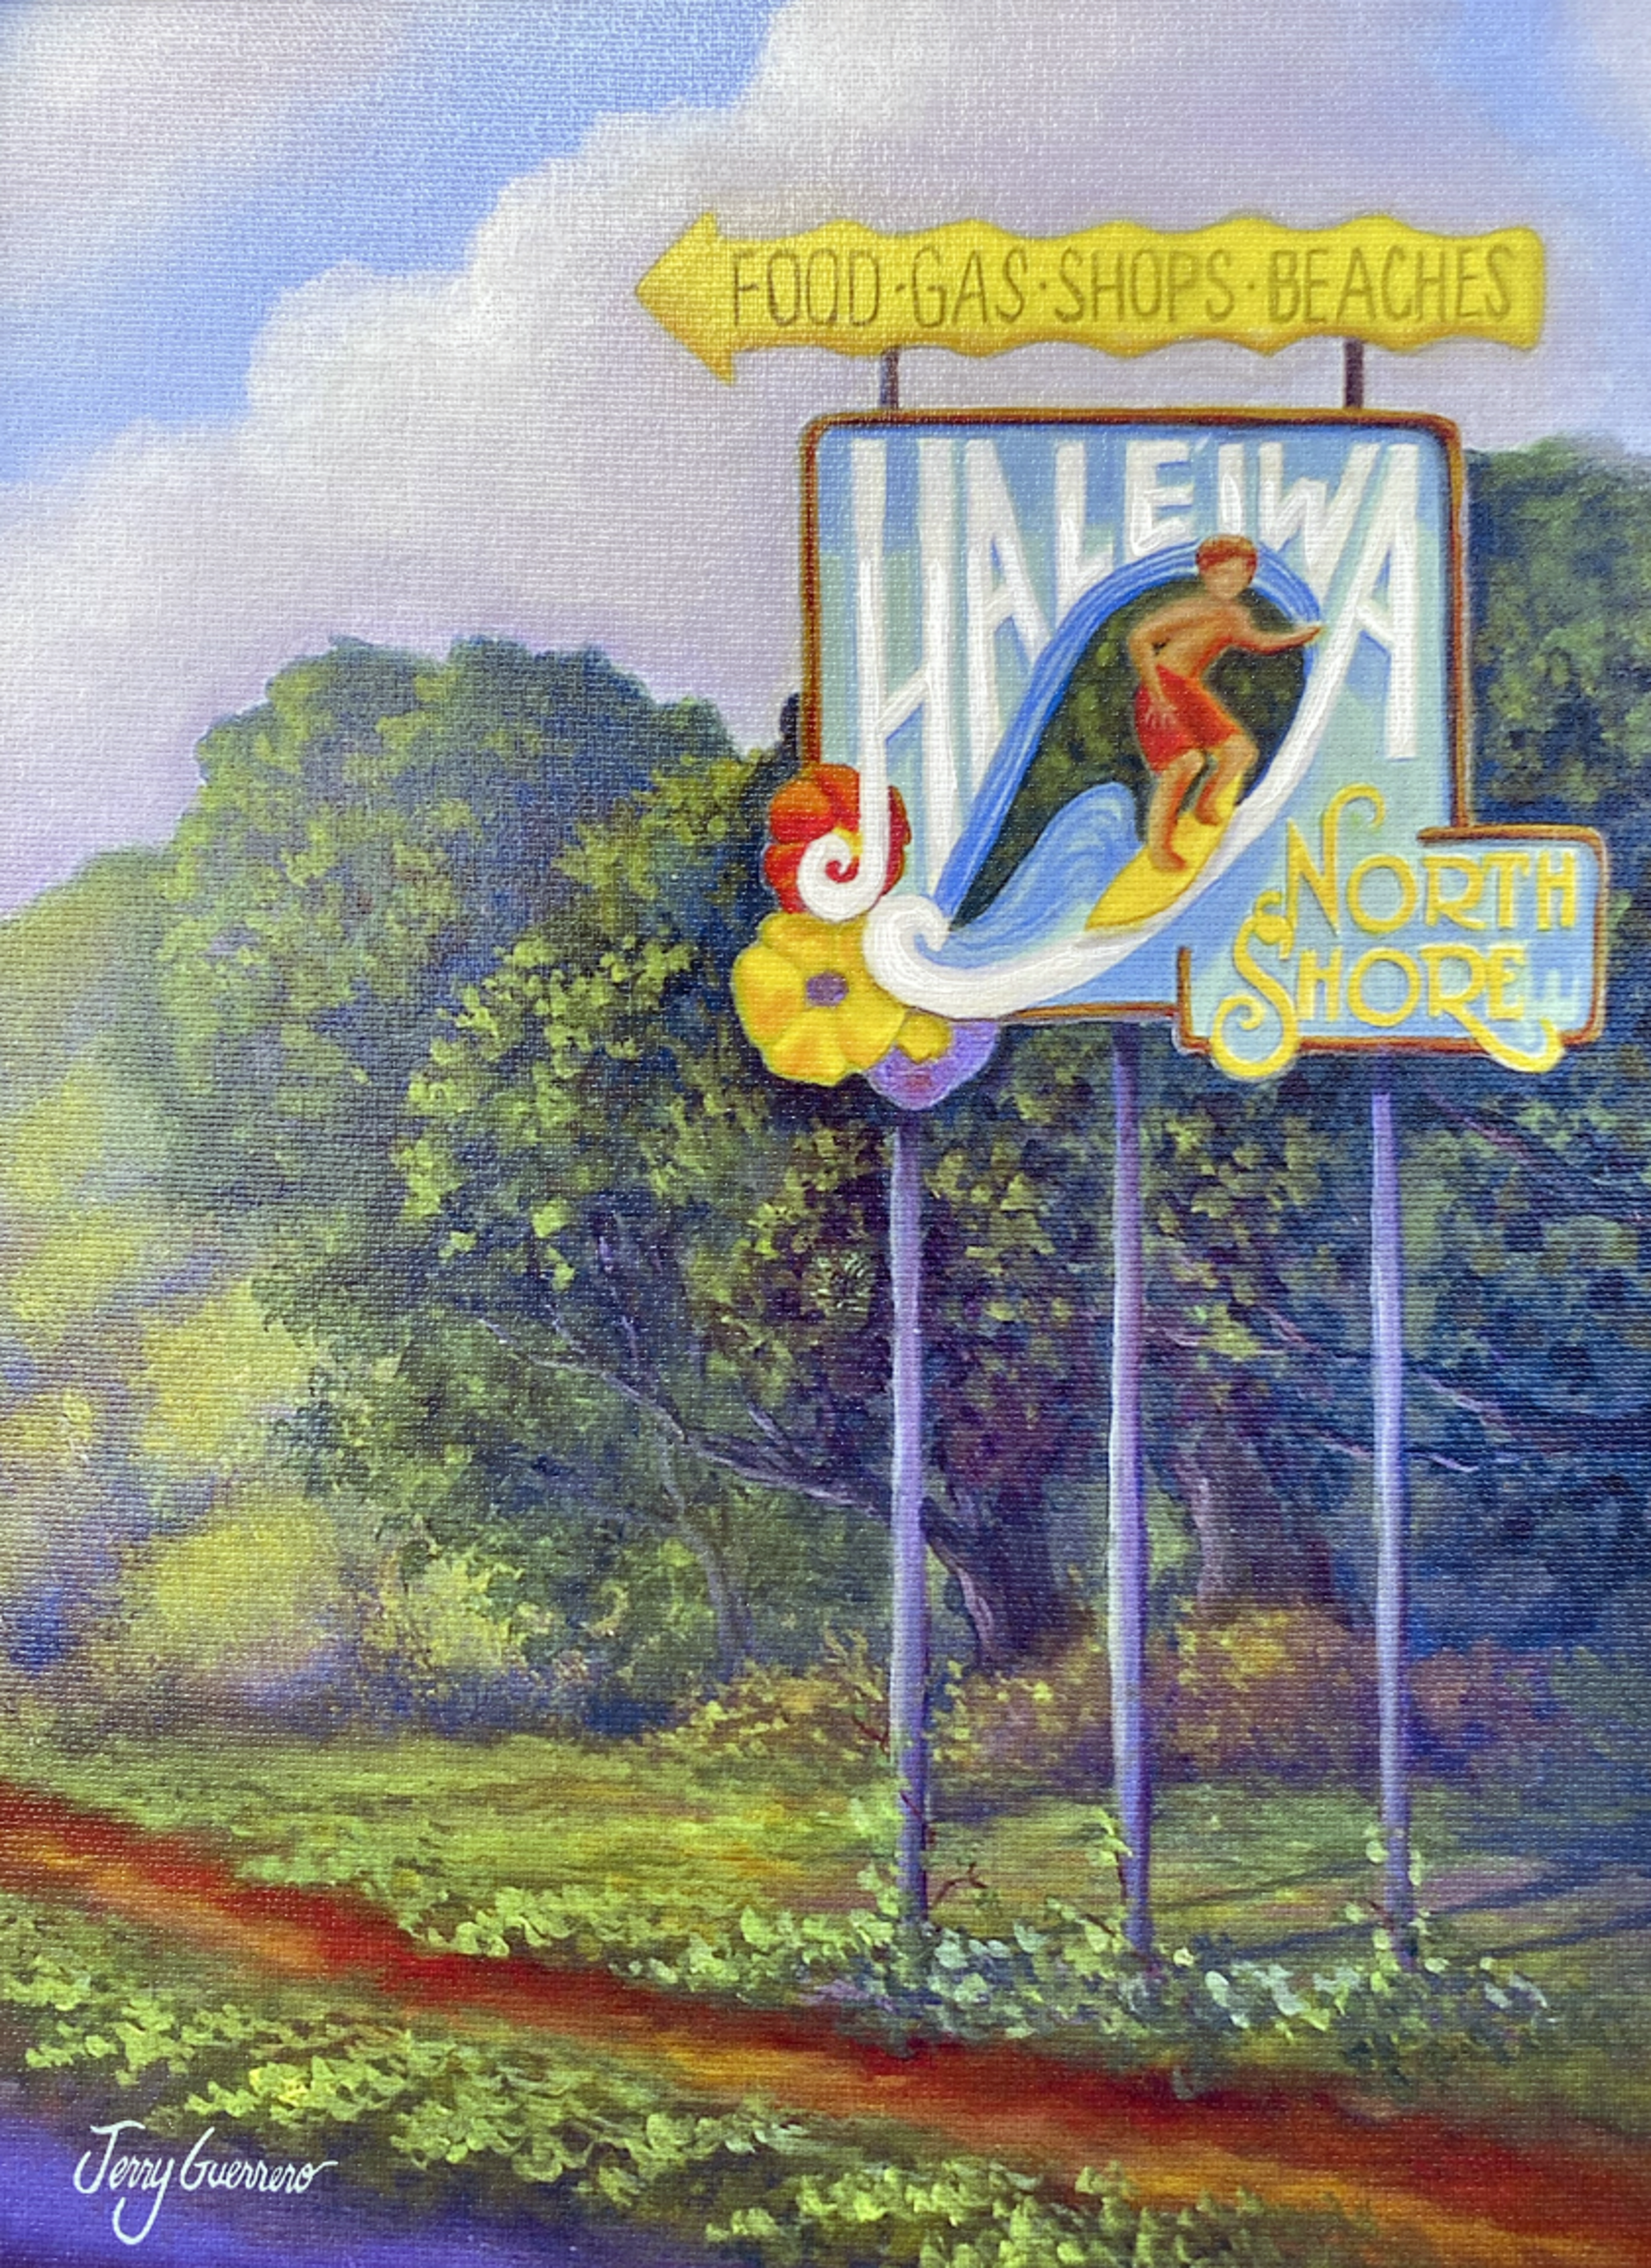 Haleʻiwa by Jerry Guerrero